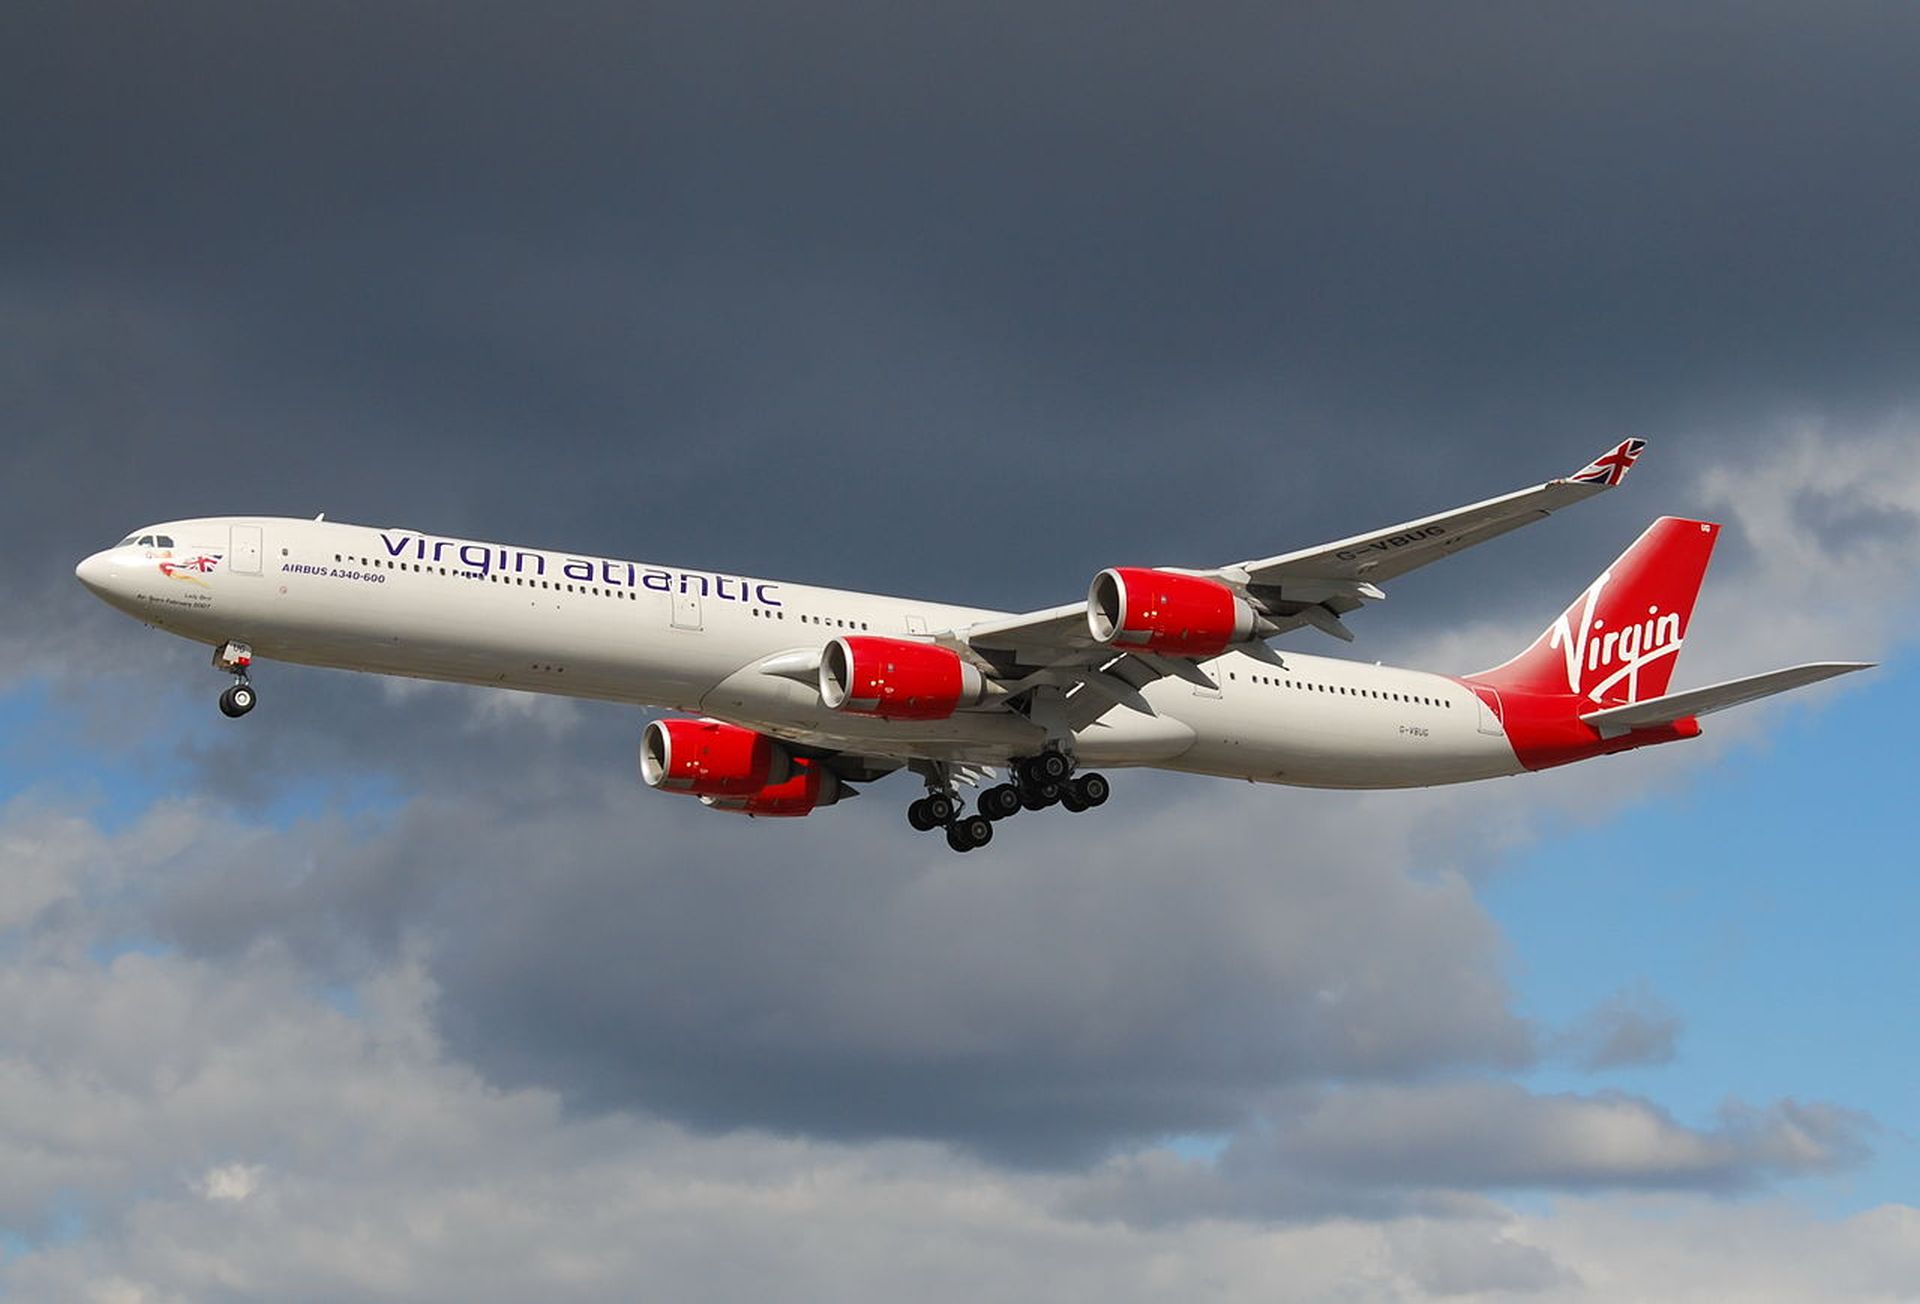 Airbus A340-600 v barvách Virgin Atlantic. Foto: Laurent ERRERA from L'Union, France / CC BY-SA (https://creativecommons.org/licenses/by-sa/2.0)